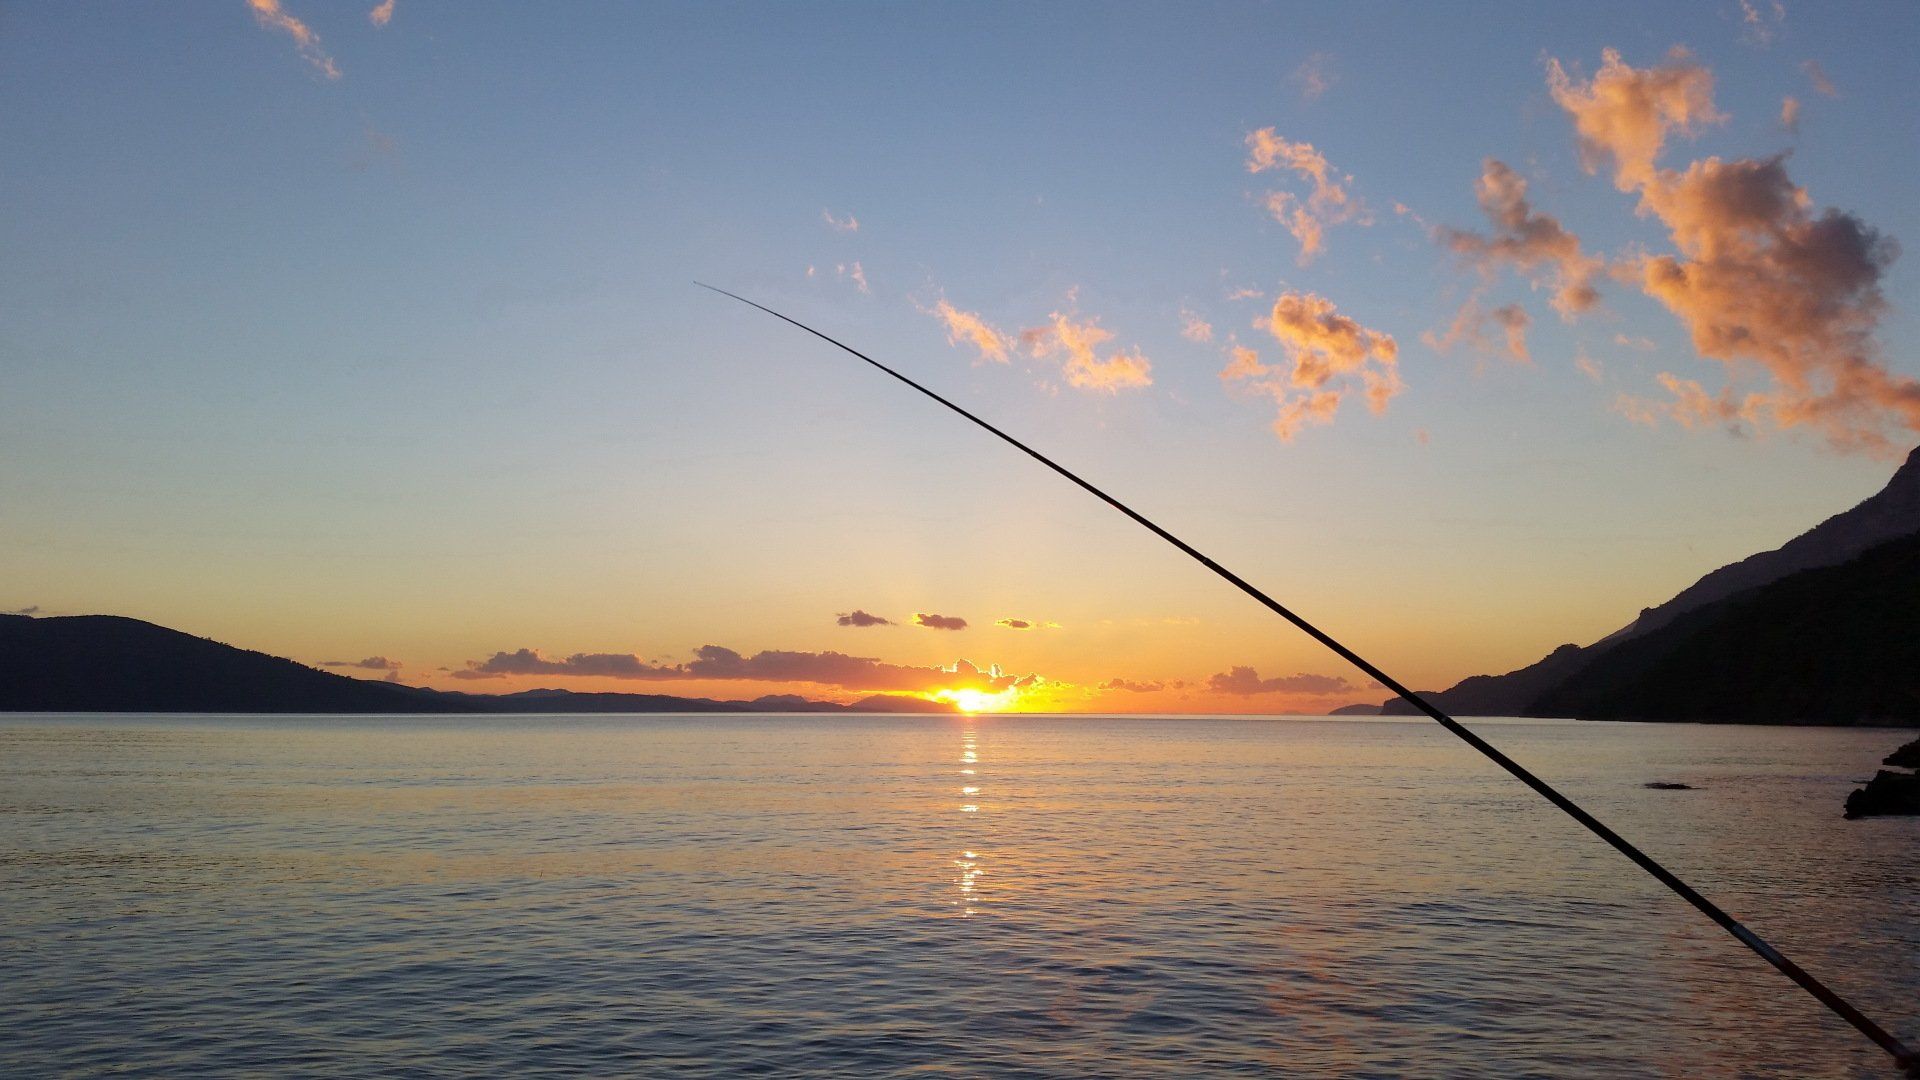 A person is fishing in the ocean at sunset